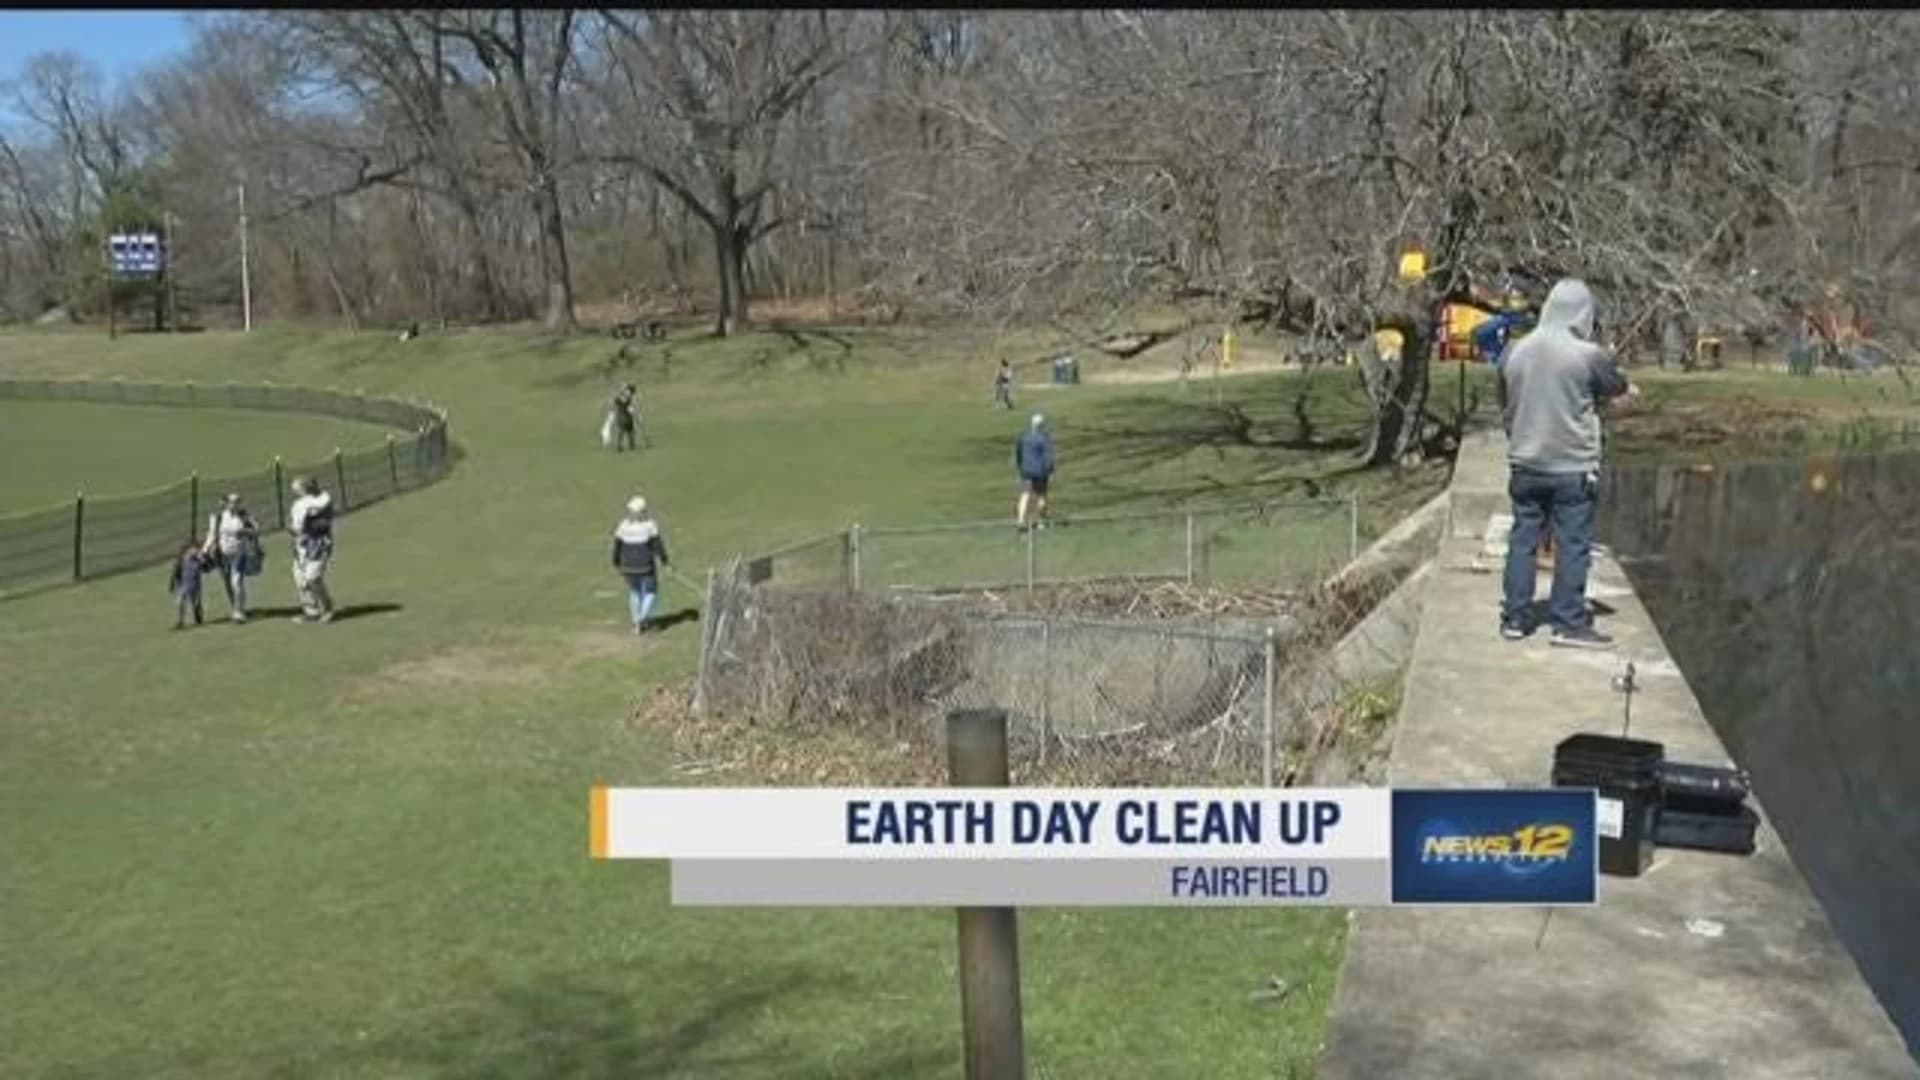 Fairfield residents tidy up community for Earth Day